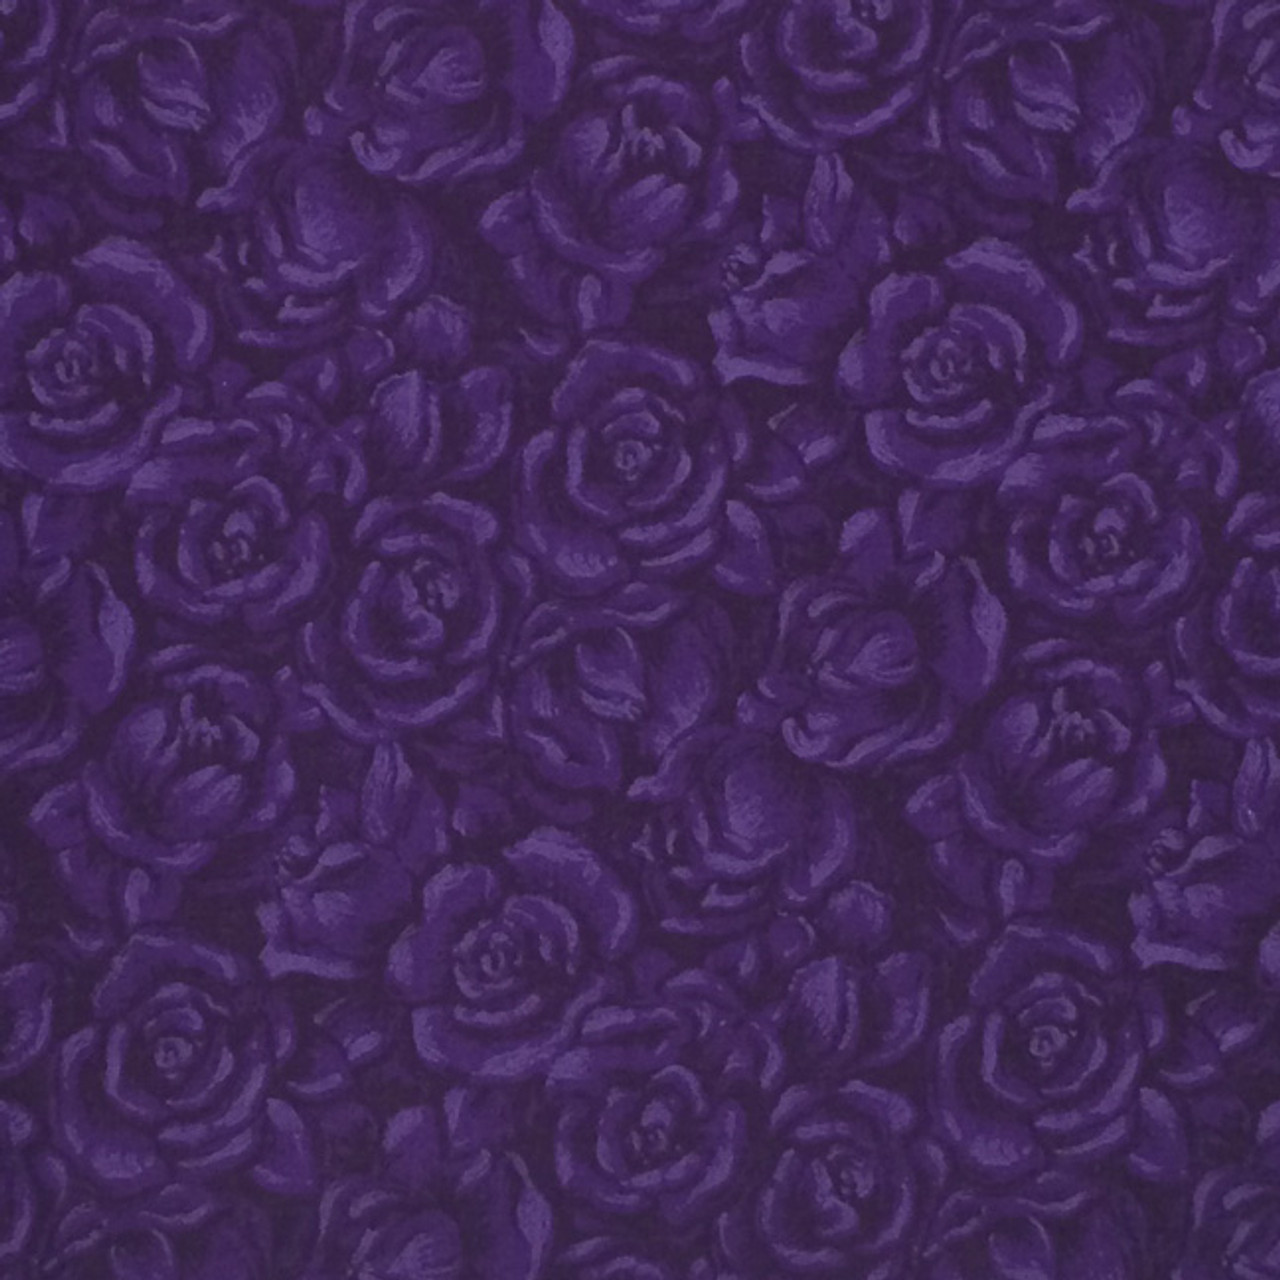 Deep Purple Roses pattern for your Microwavable Corn Heating Pad, Corn Bag Warmer